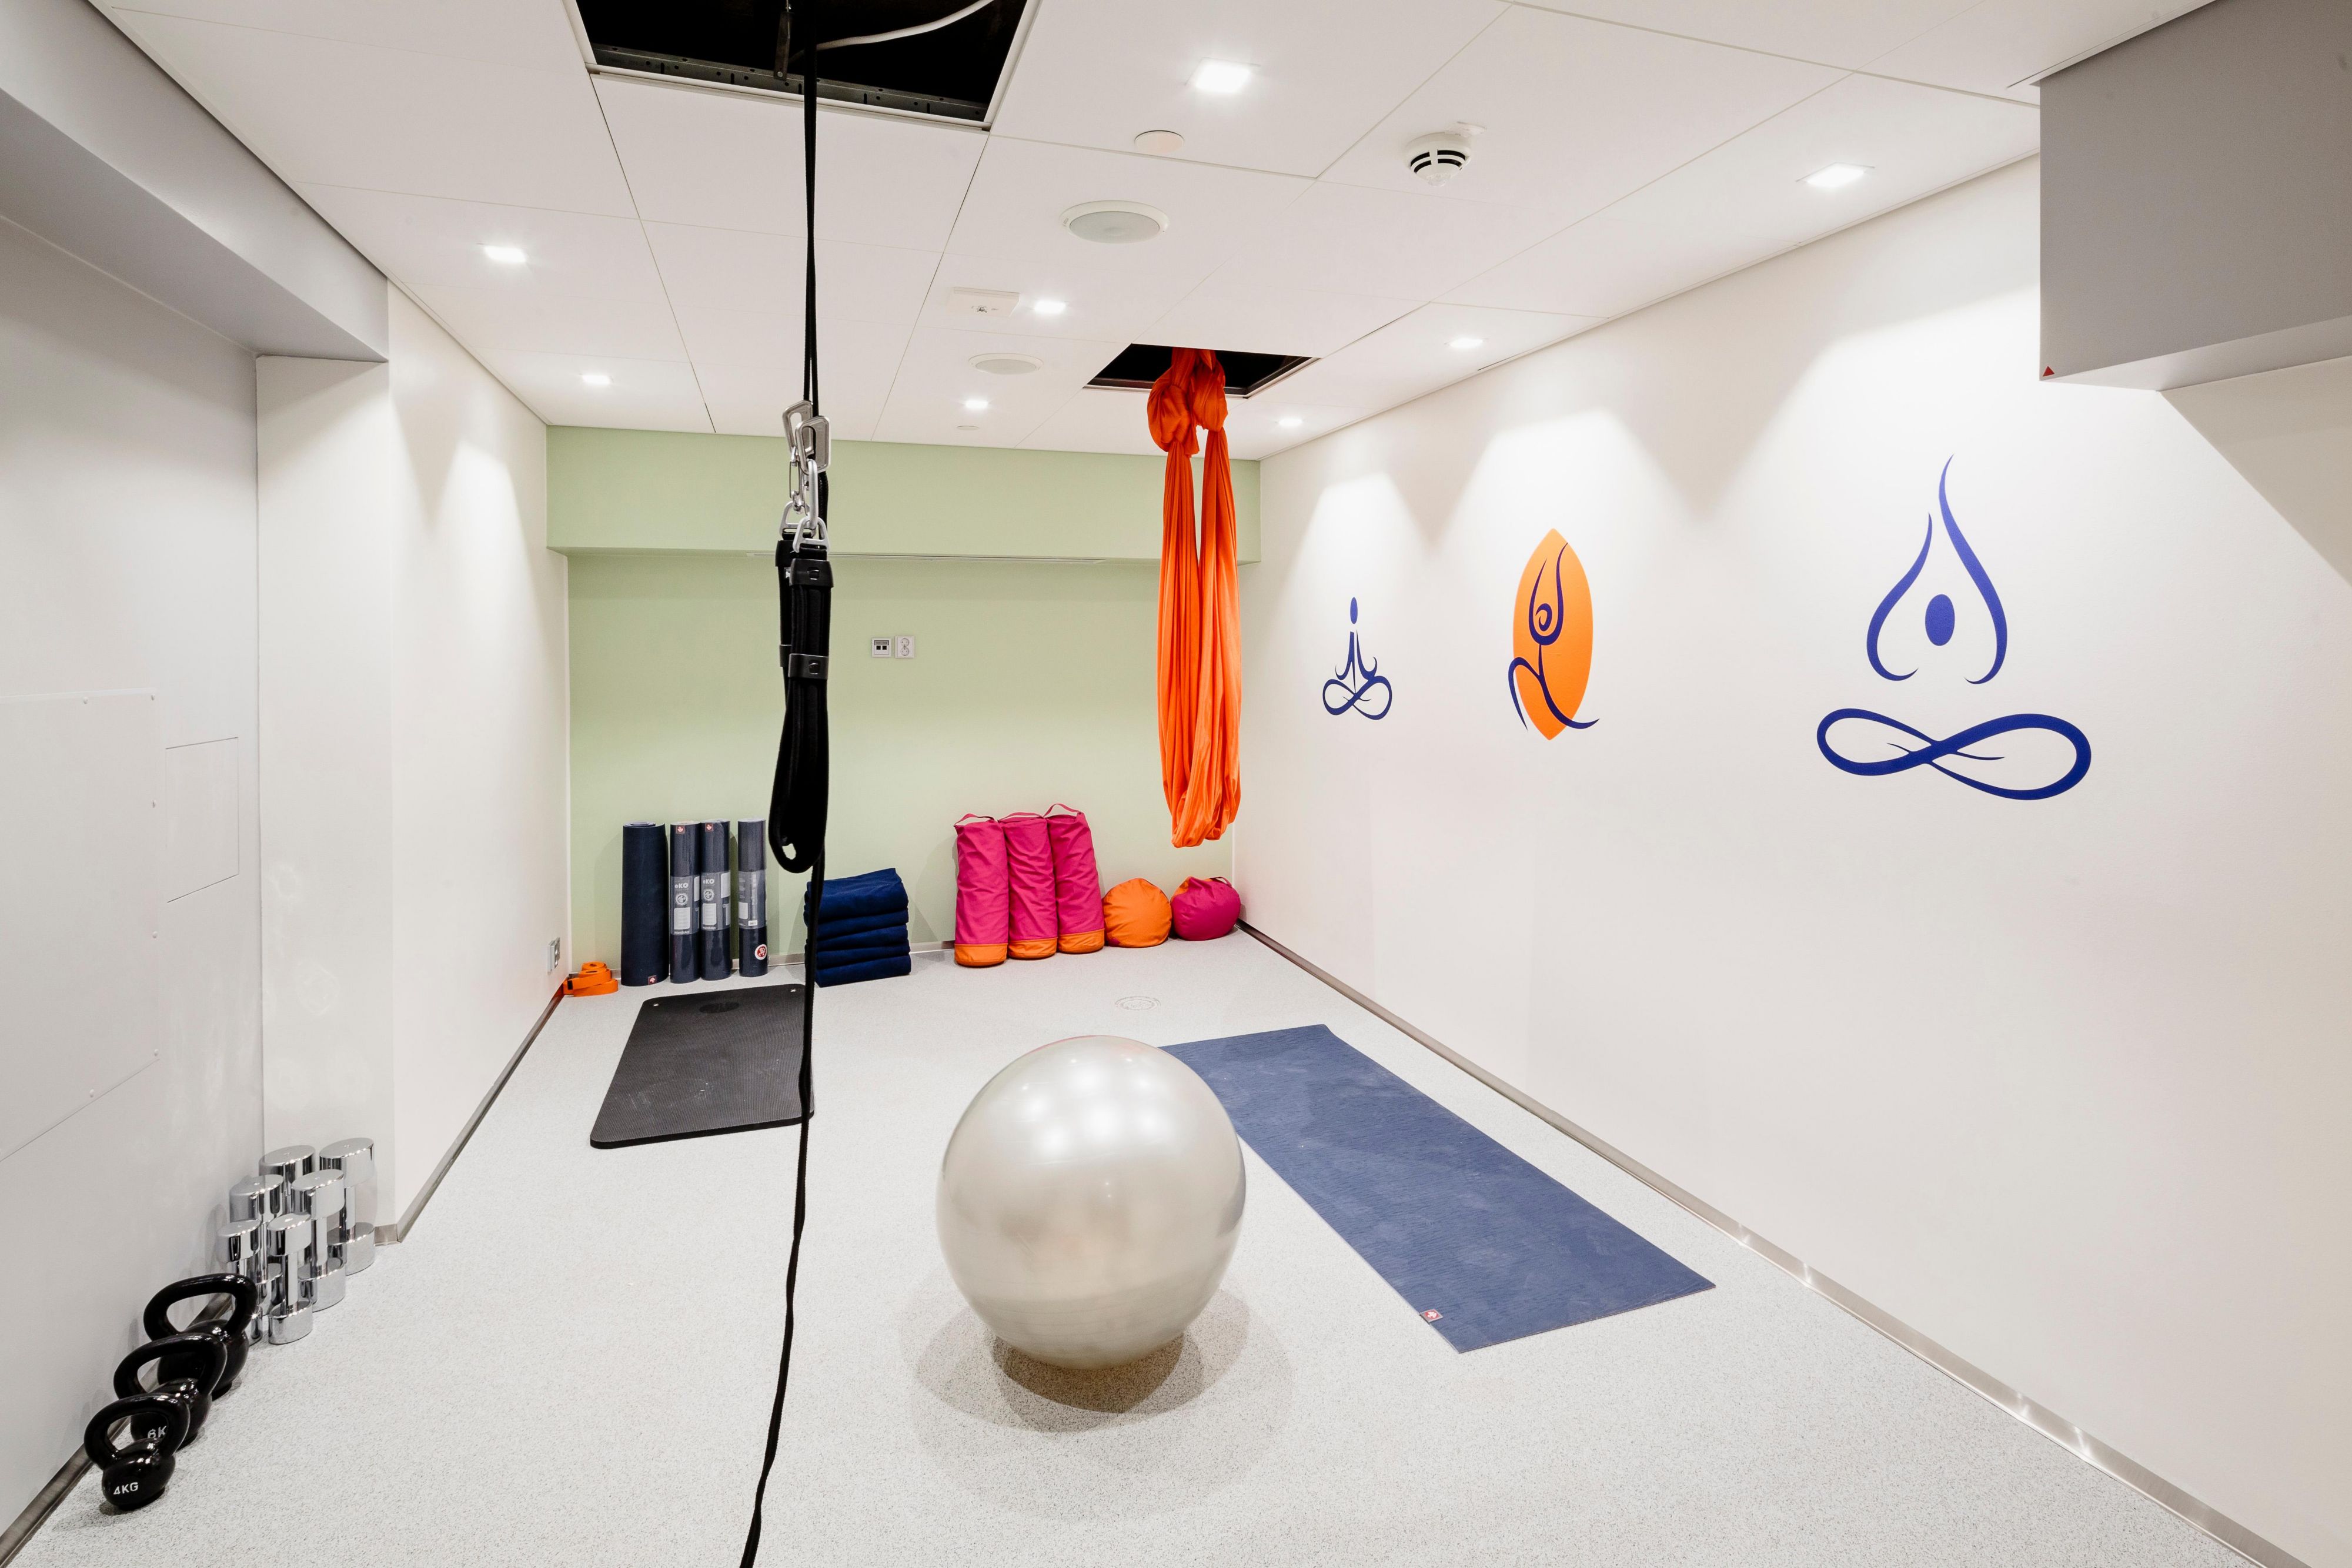 Don't forget to take your Yoga pants with you. Our Body, Mind & Soul Studio comes with a yoga room, fitted with a silk yoga trapeze hammock and a functional workout system Jungle Sports Liana. You can also find recorded yoga lessons in our hotel television.